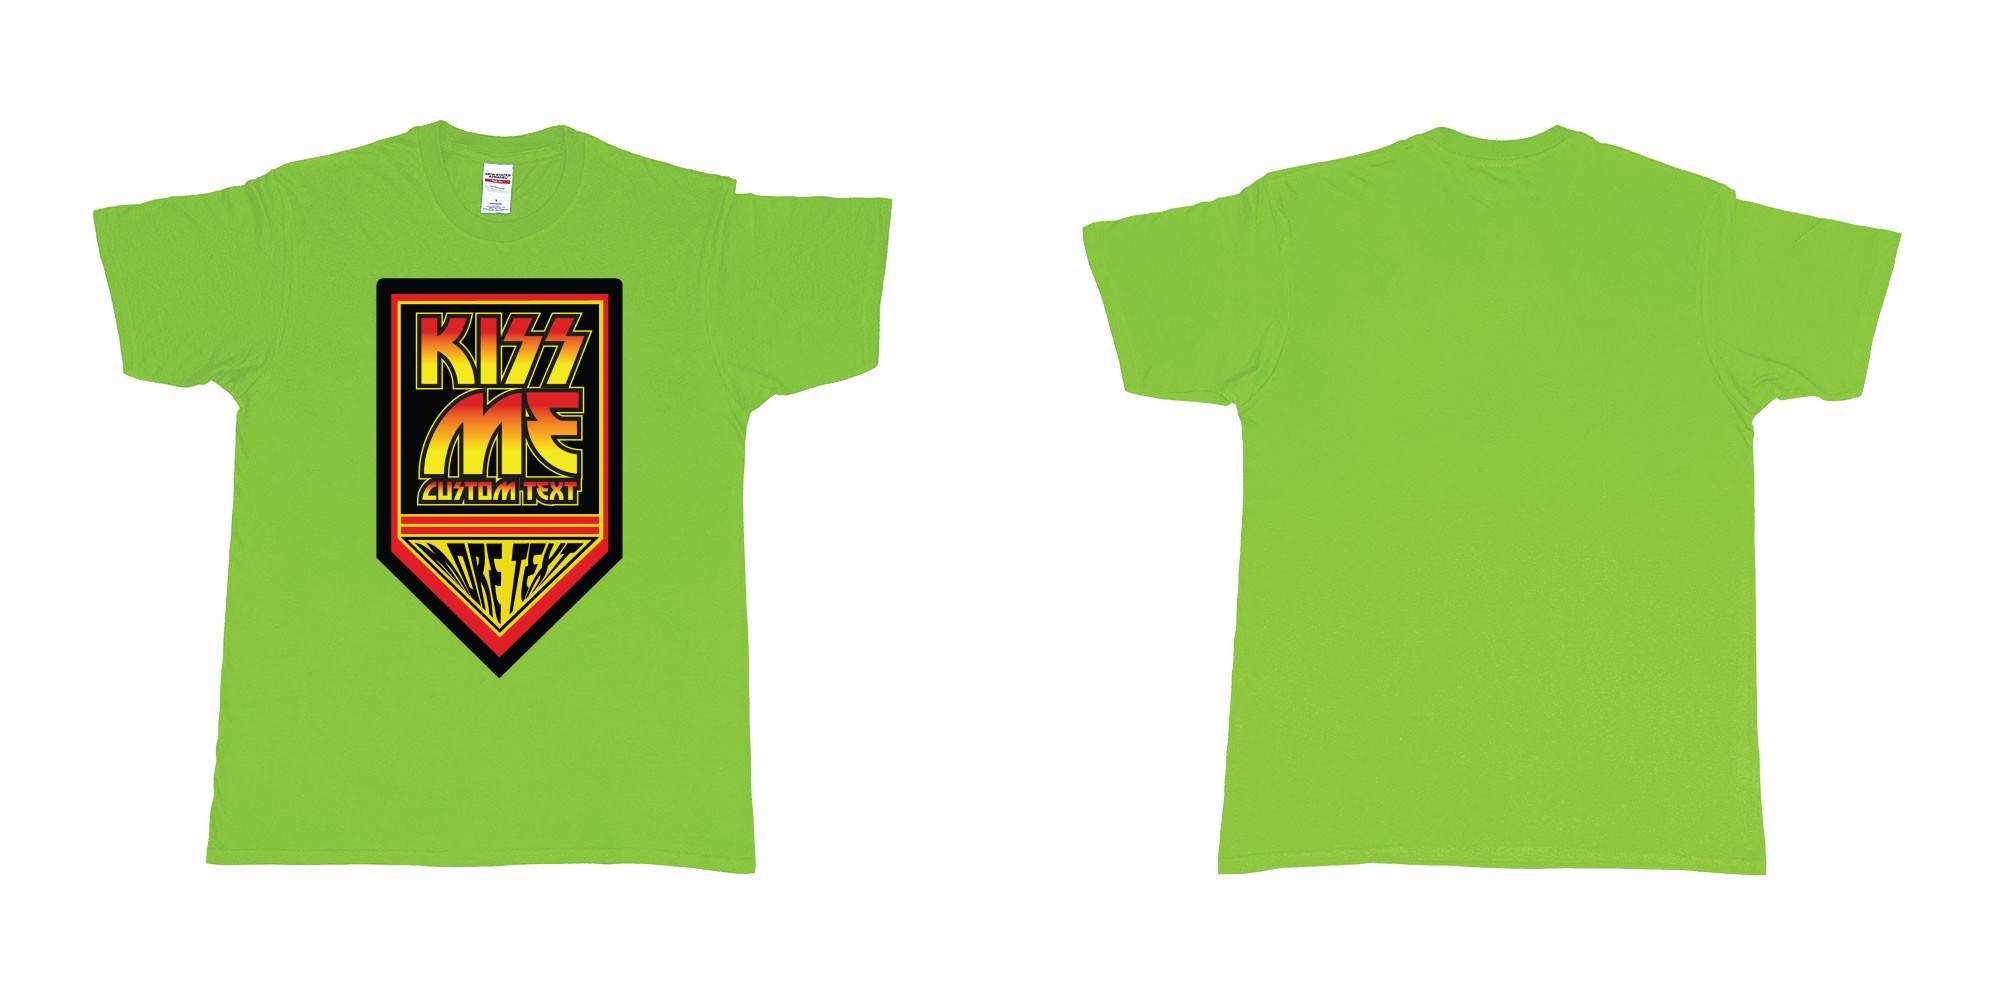 Custom tshirt design the band kiss logo custom text in fabric color lime choice your own text made in Bali by The Pirate Way